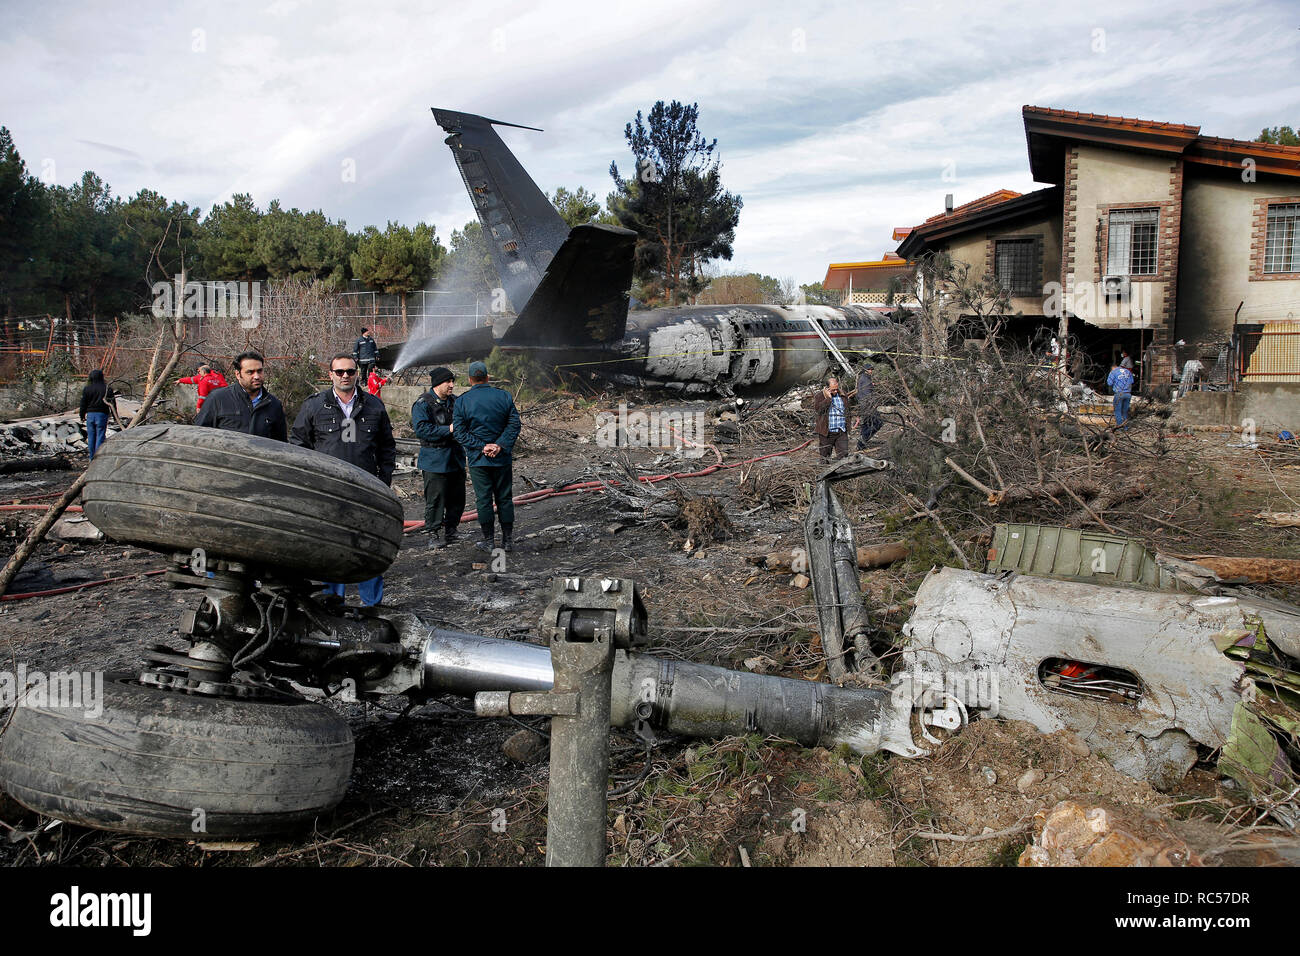 This photo provided by Mizan News Agency, shows Iranian rescue personnel and security work at the site of a Boeing 707 cargo plane crash, at Fath Airport about 40 kilometers (25 miles) west of Tehran, Iran, Monday, Jan. 14, 2019. An Iranian emergency management official has told state TV that 16 people were on board a Boeing 707 cargo plane that crashed west of Tehran and that there is only one known survivor. (Hasan Shirvani/Mizan News Agency via AP) Stock Photo